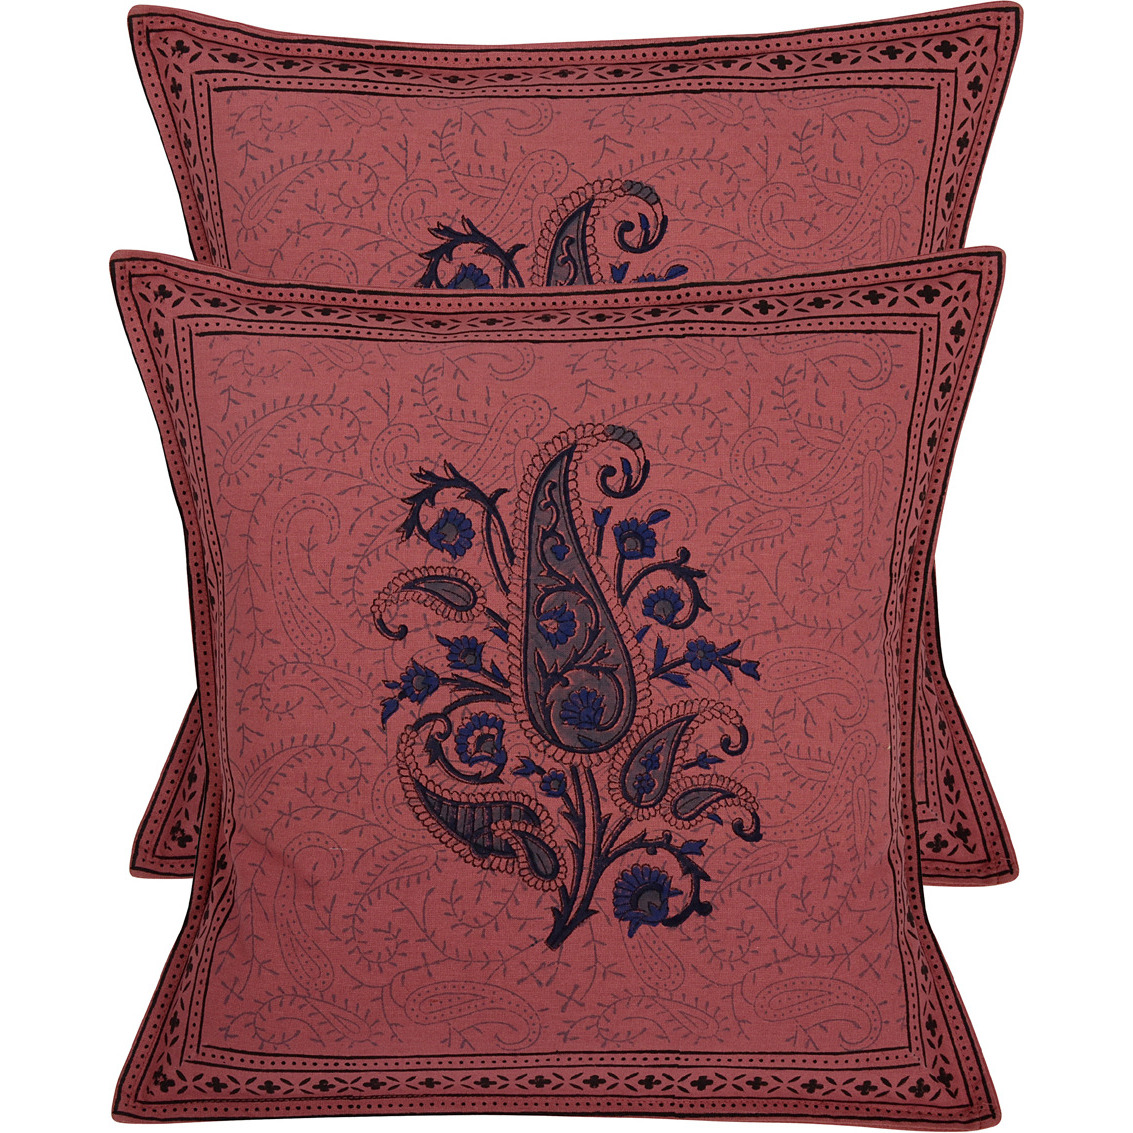 Indian Cushion Cover Floral Paisley Design Cotton Pillow Case 16 Inch House Warming